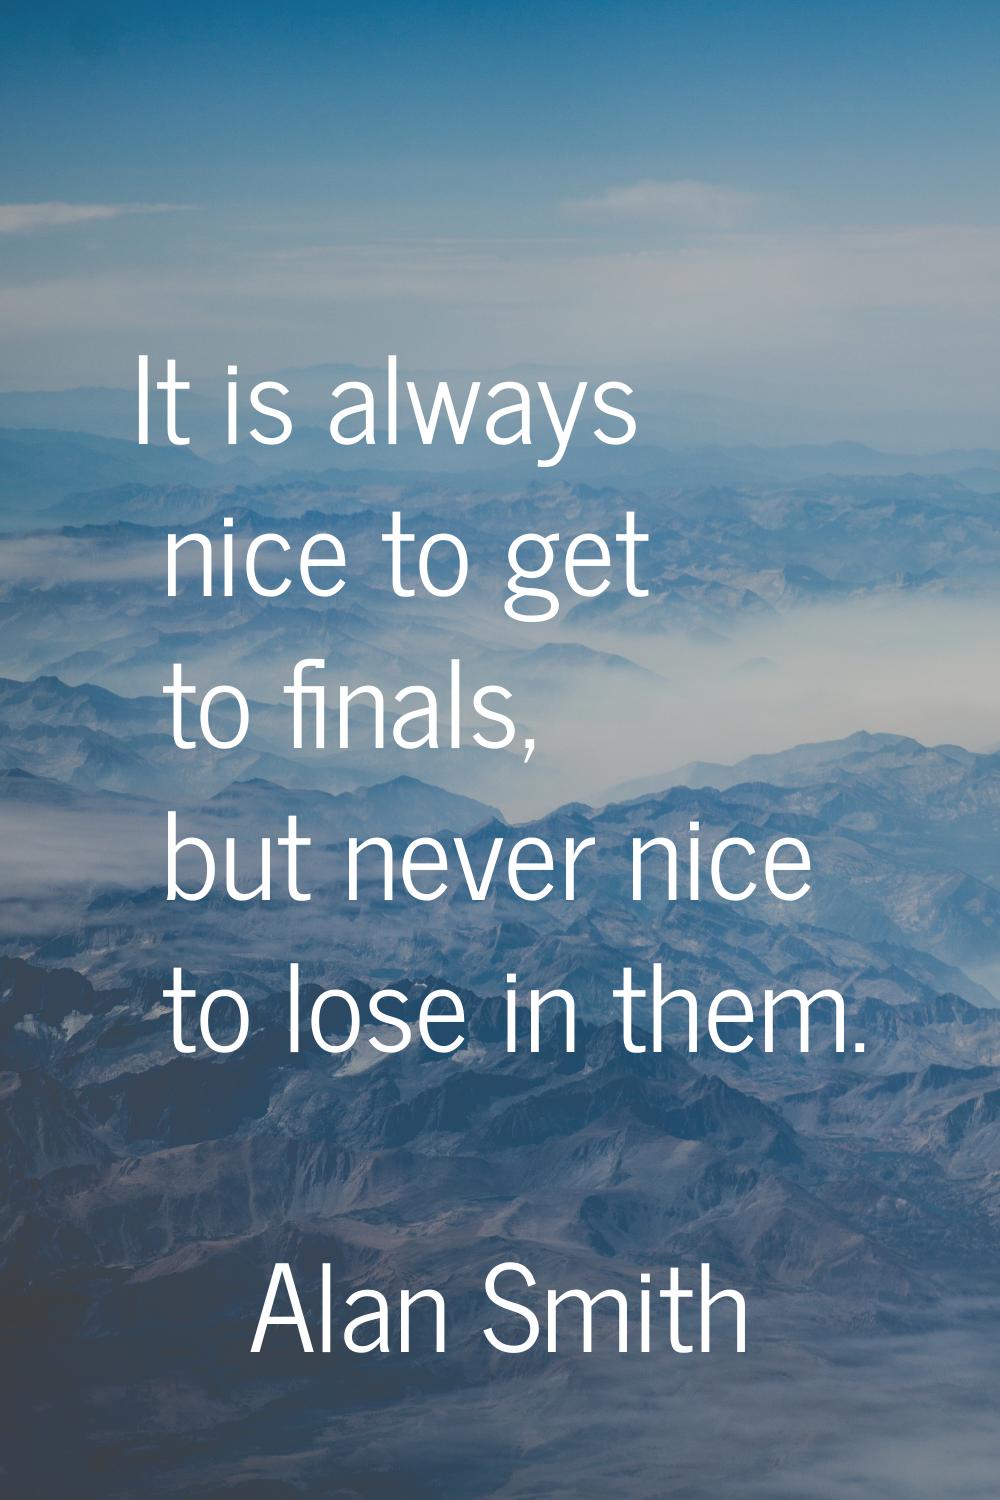 It is always nice to get to finals, but never nice to lose in them.